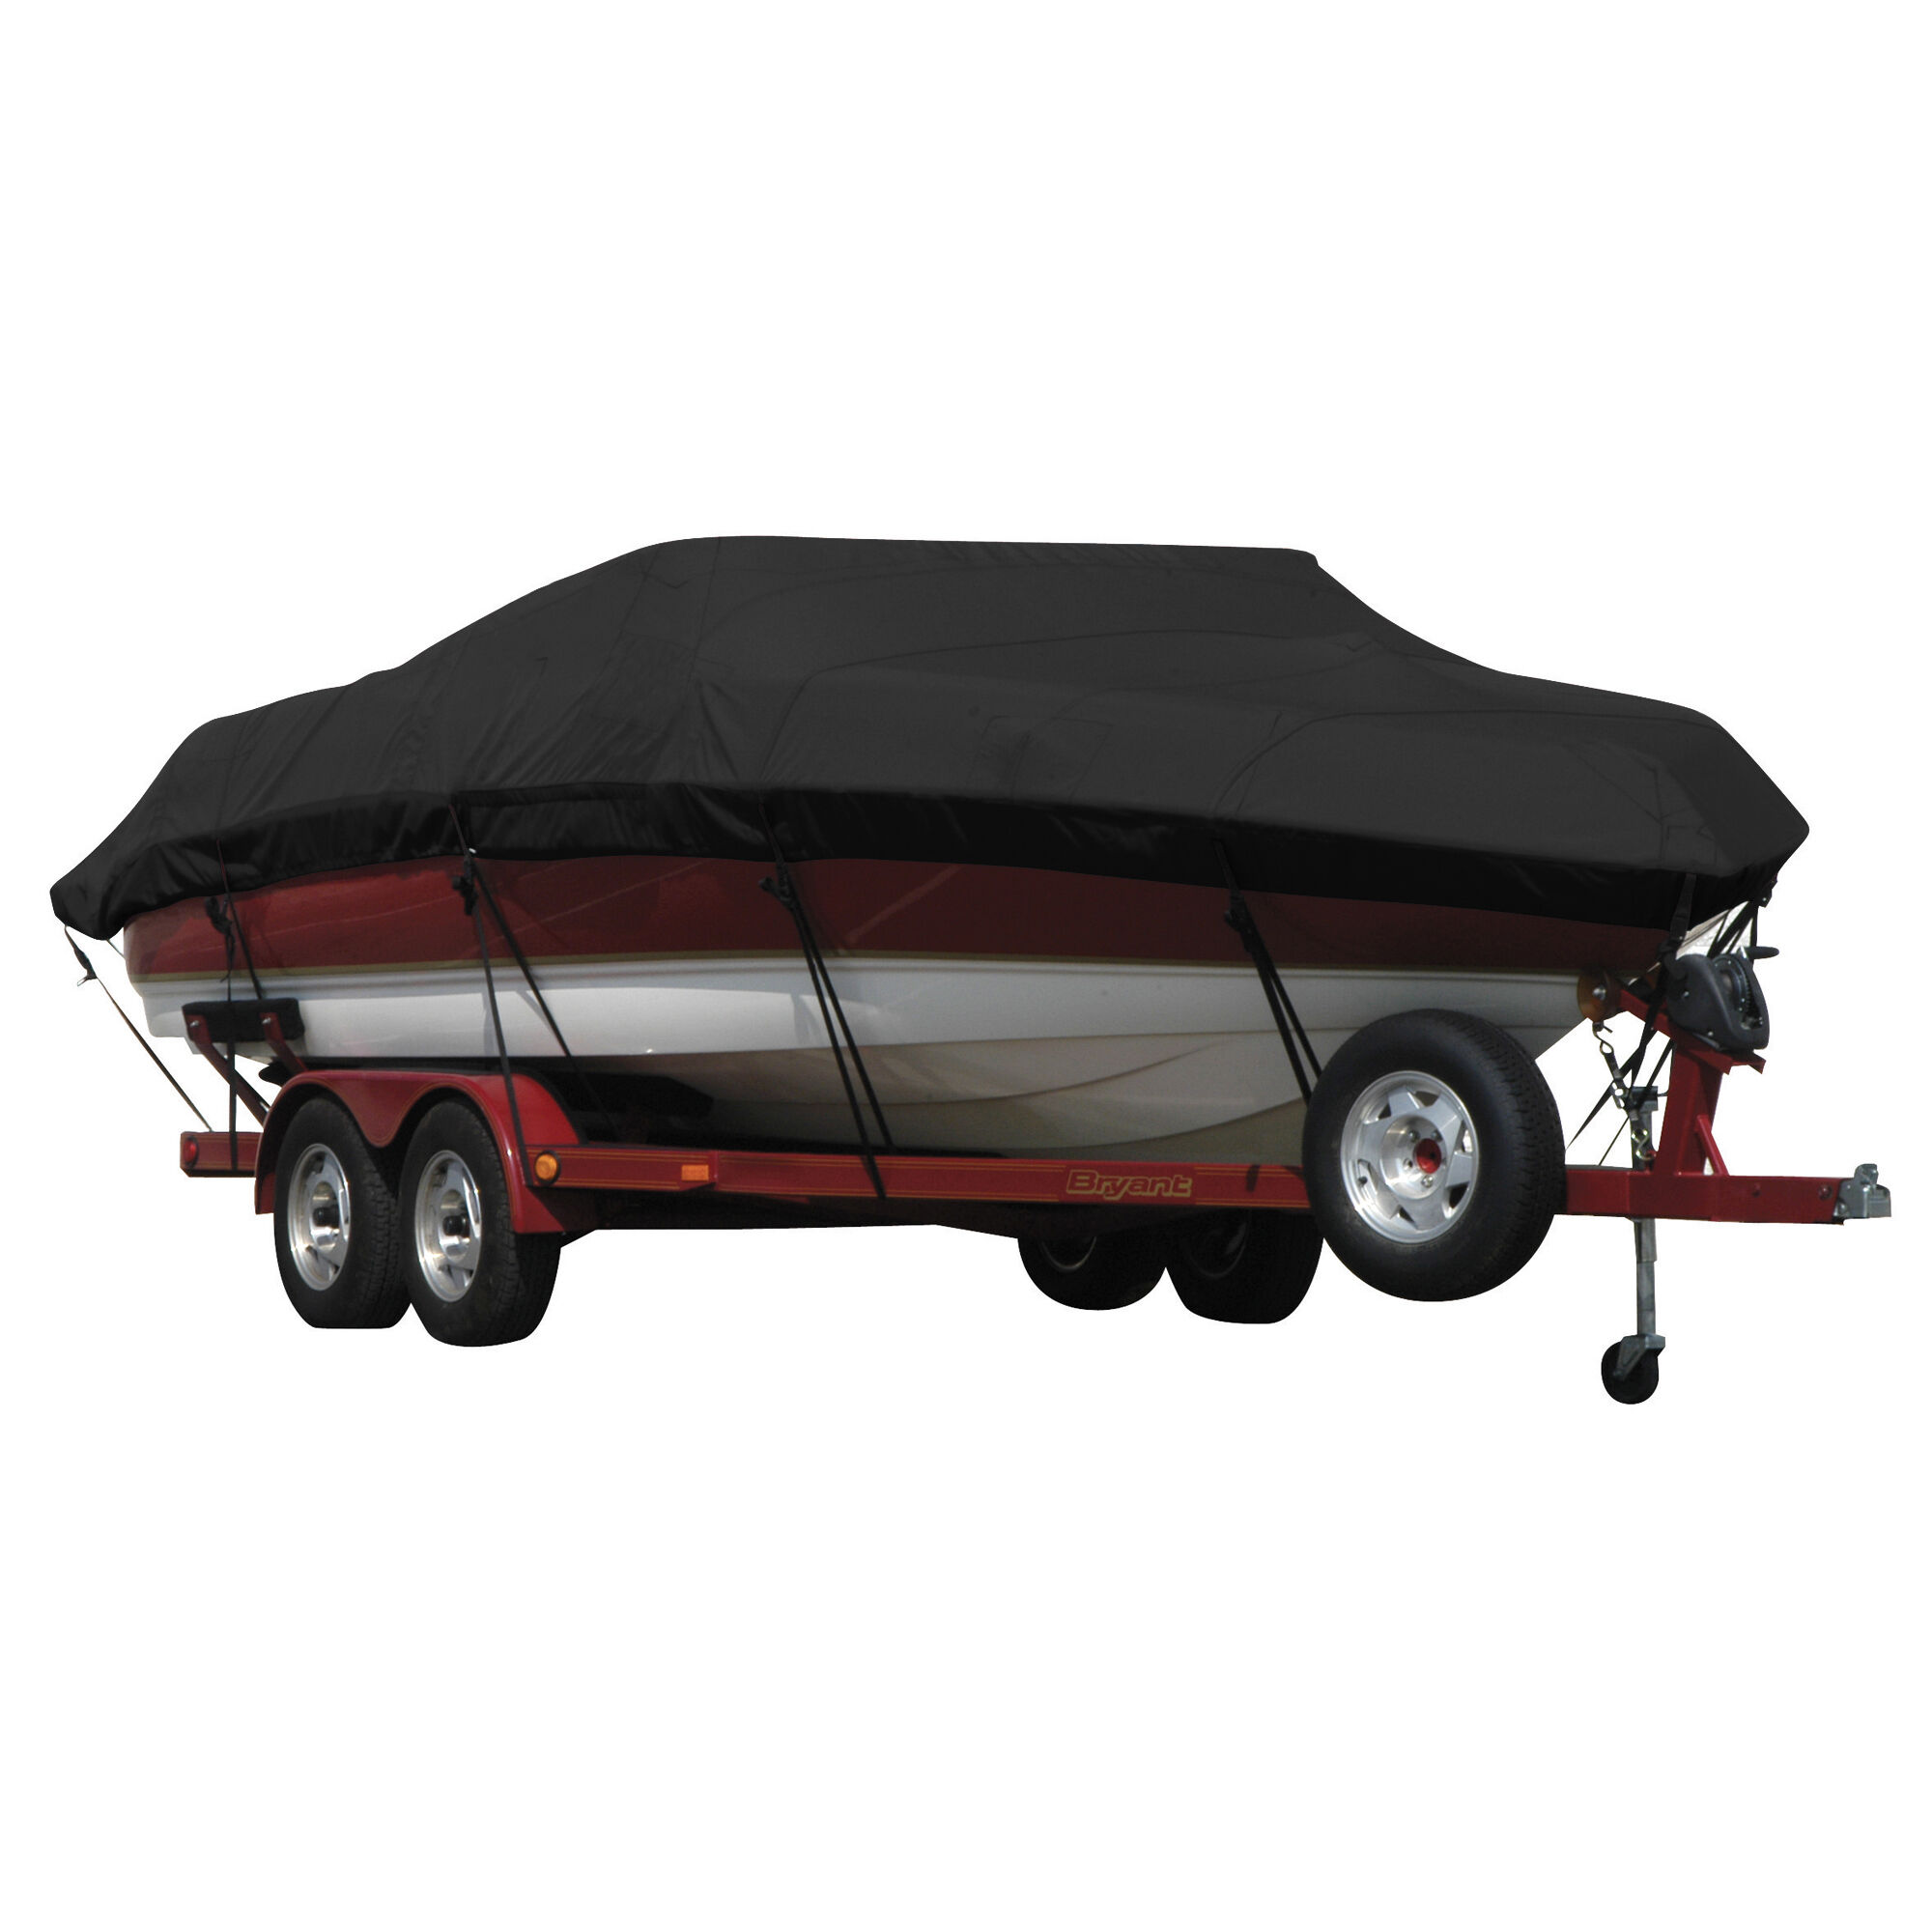 Covermate Exact Fit Sunbrella Boat Cover for Reinell/Beachcraft 200 Br 200 Br w/ Swoop Tower High Windshield I/O. Black